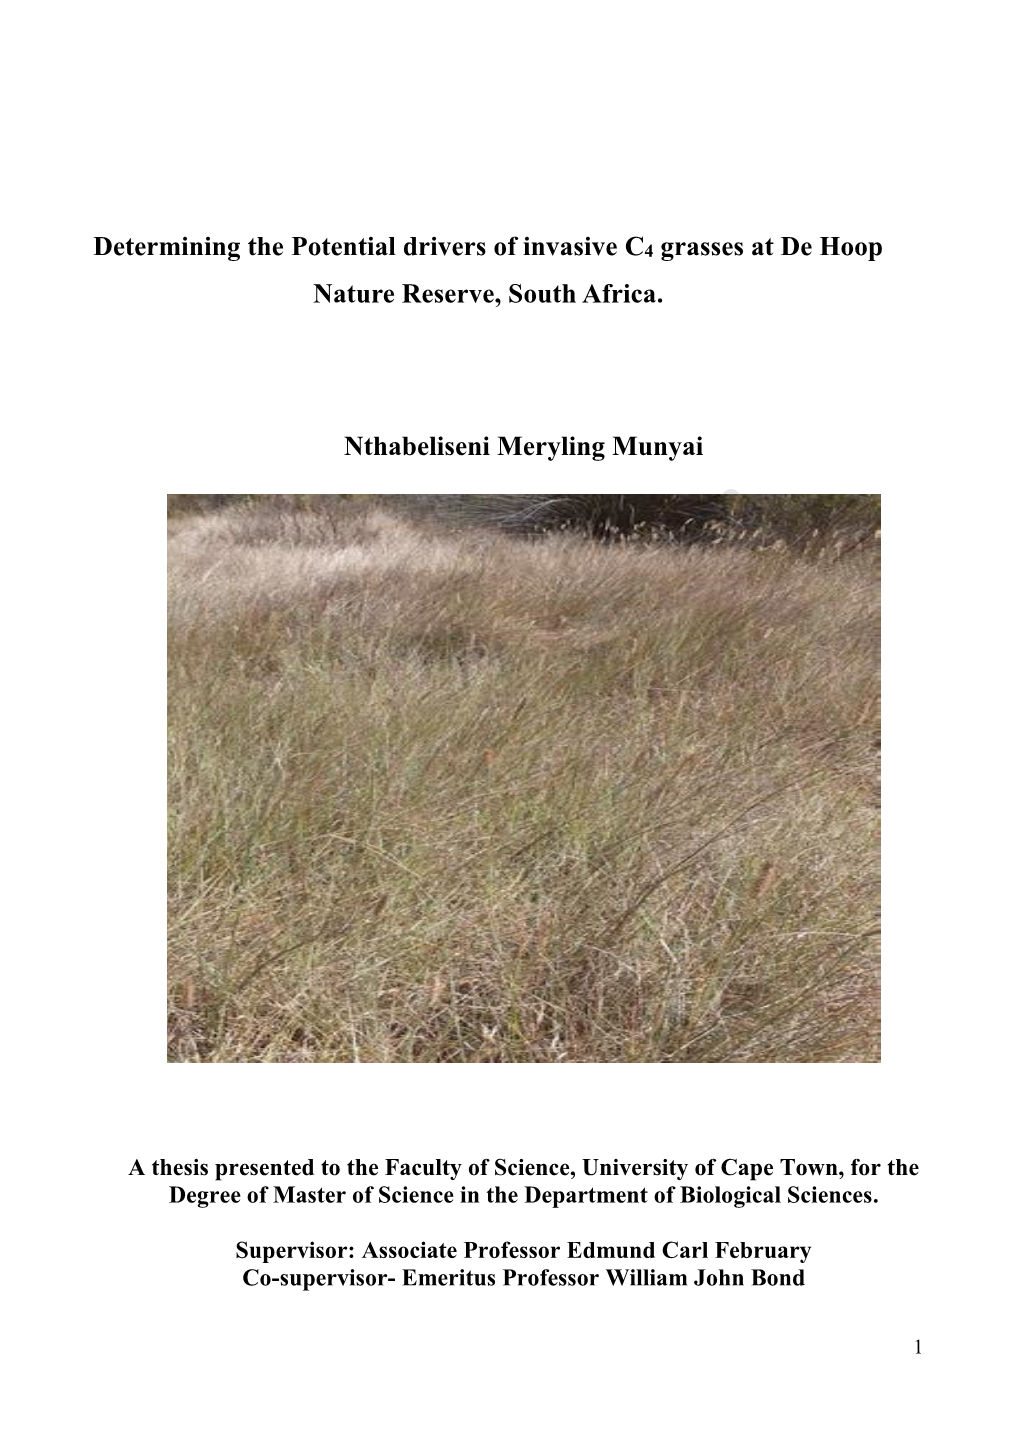 Determining the Potential Drivers of Invasive C4 Grasses at De Hoop Nature Reserve, South Africa